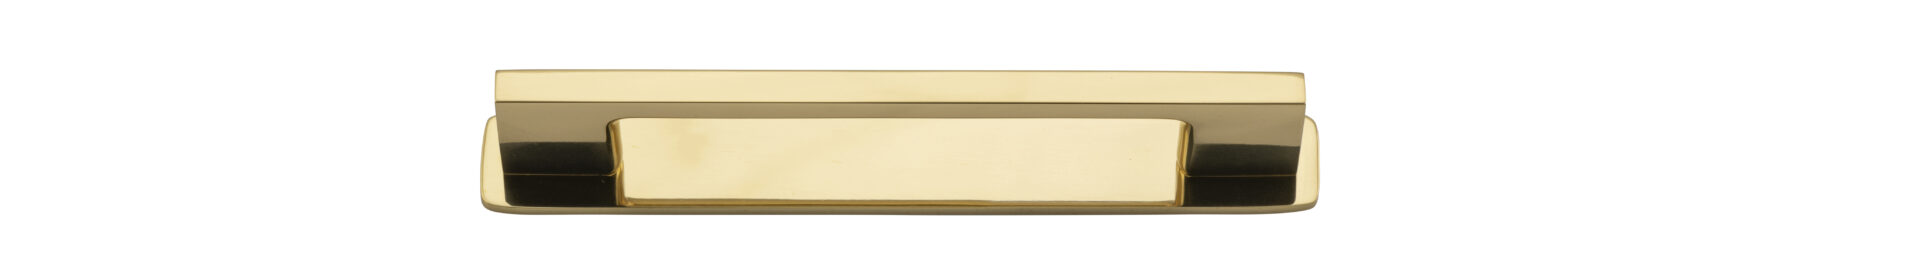 0515B - Cali Cabinet Pull with Backplate - CTC 128mm - Polished Brass